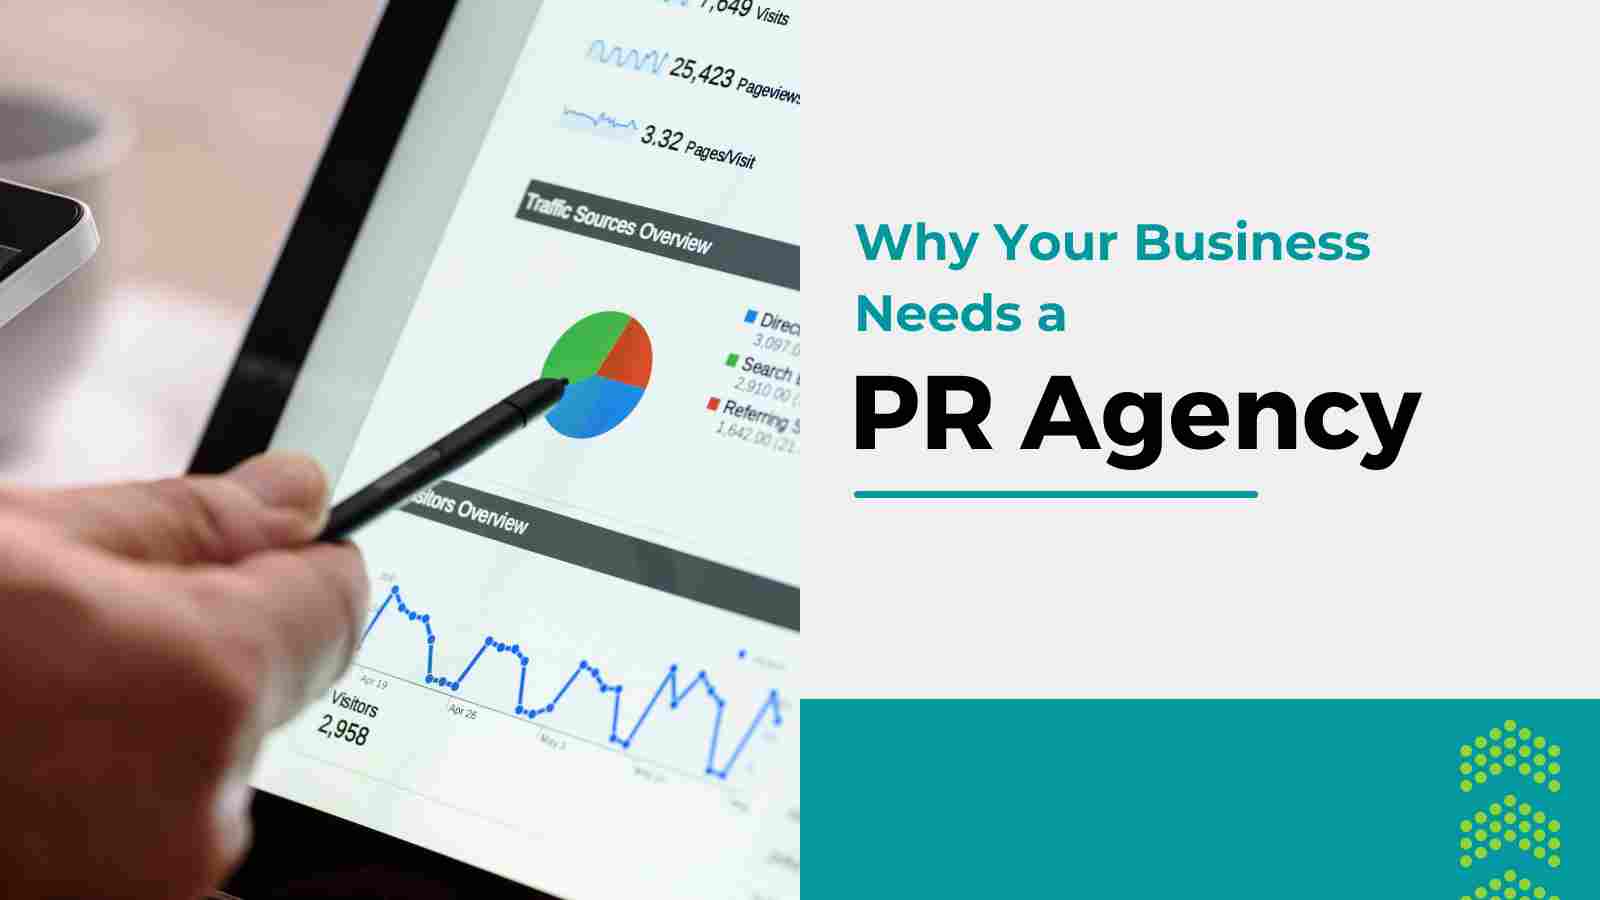 Why Your Business Needs a PR Agency